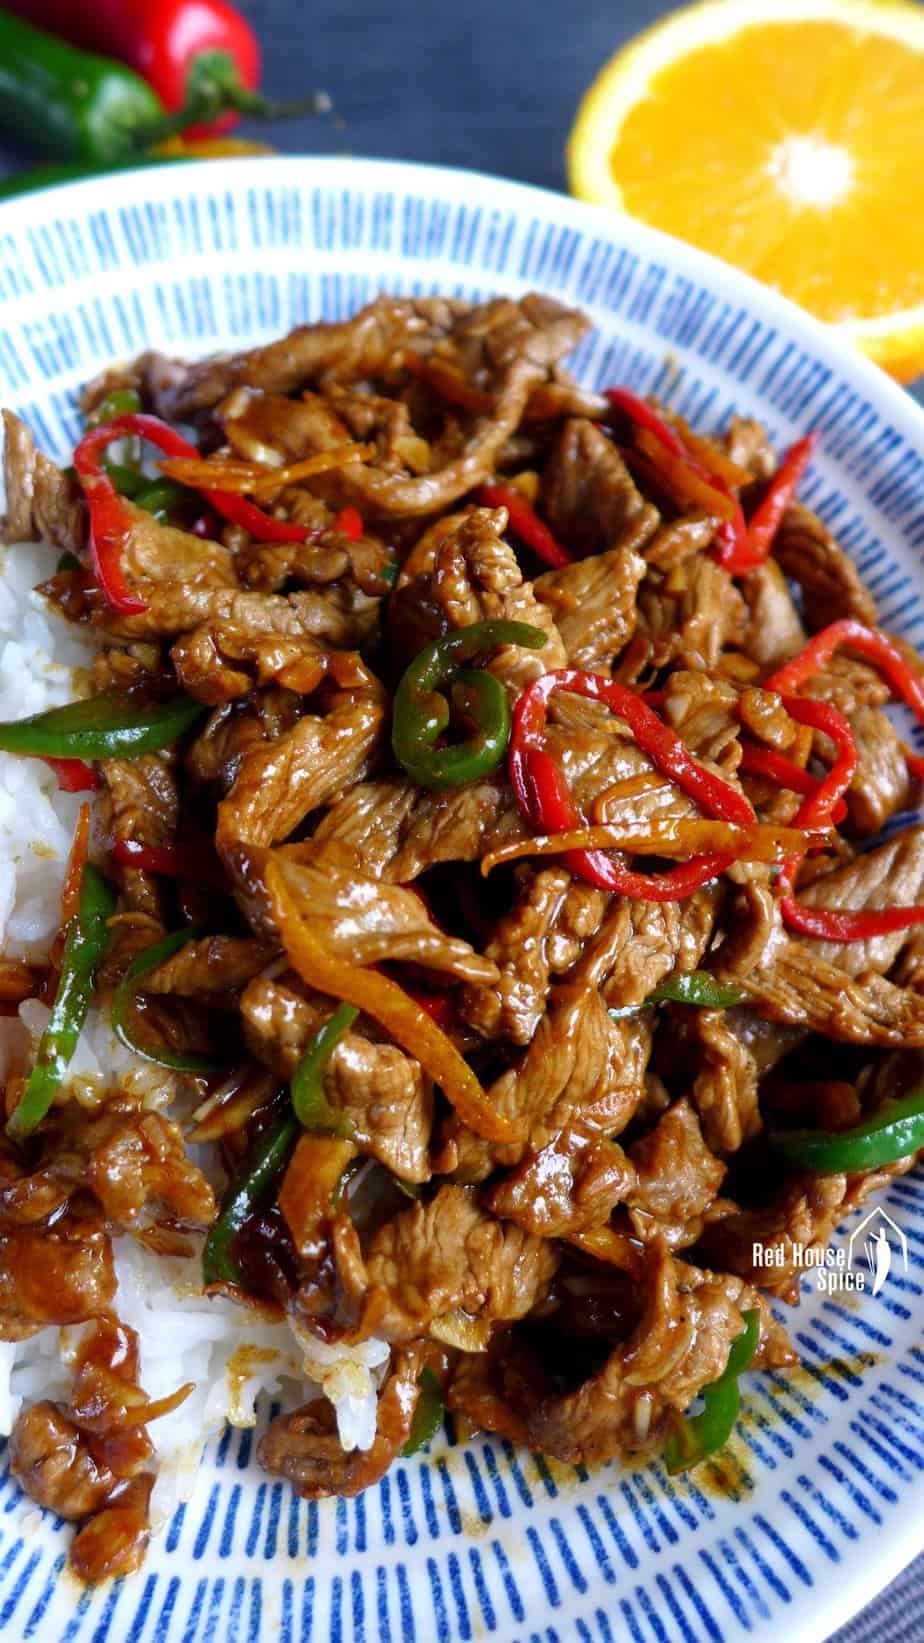 A plate of stir-fried orange beef over rice